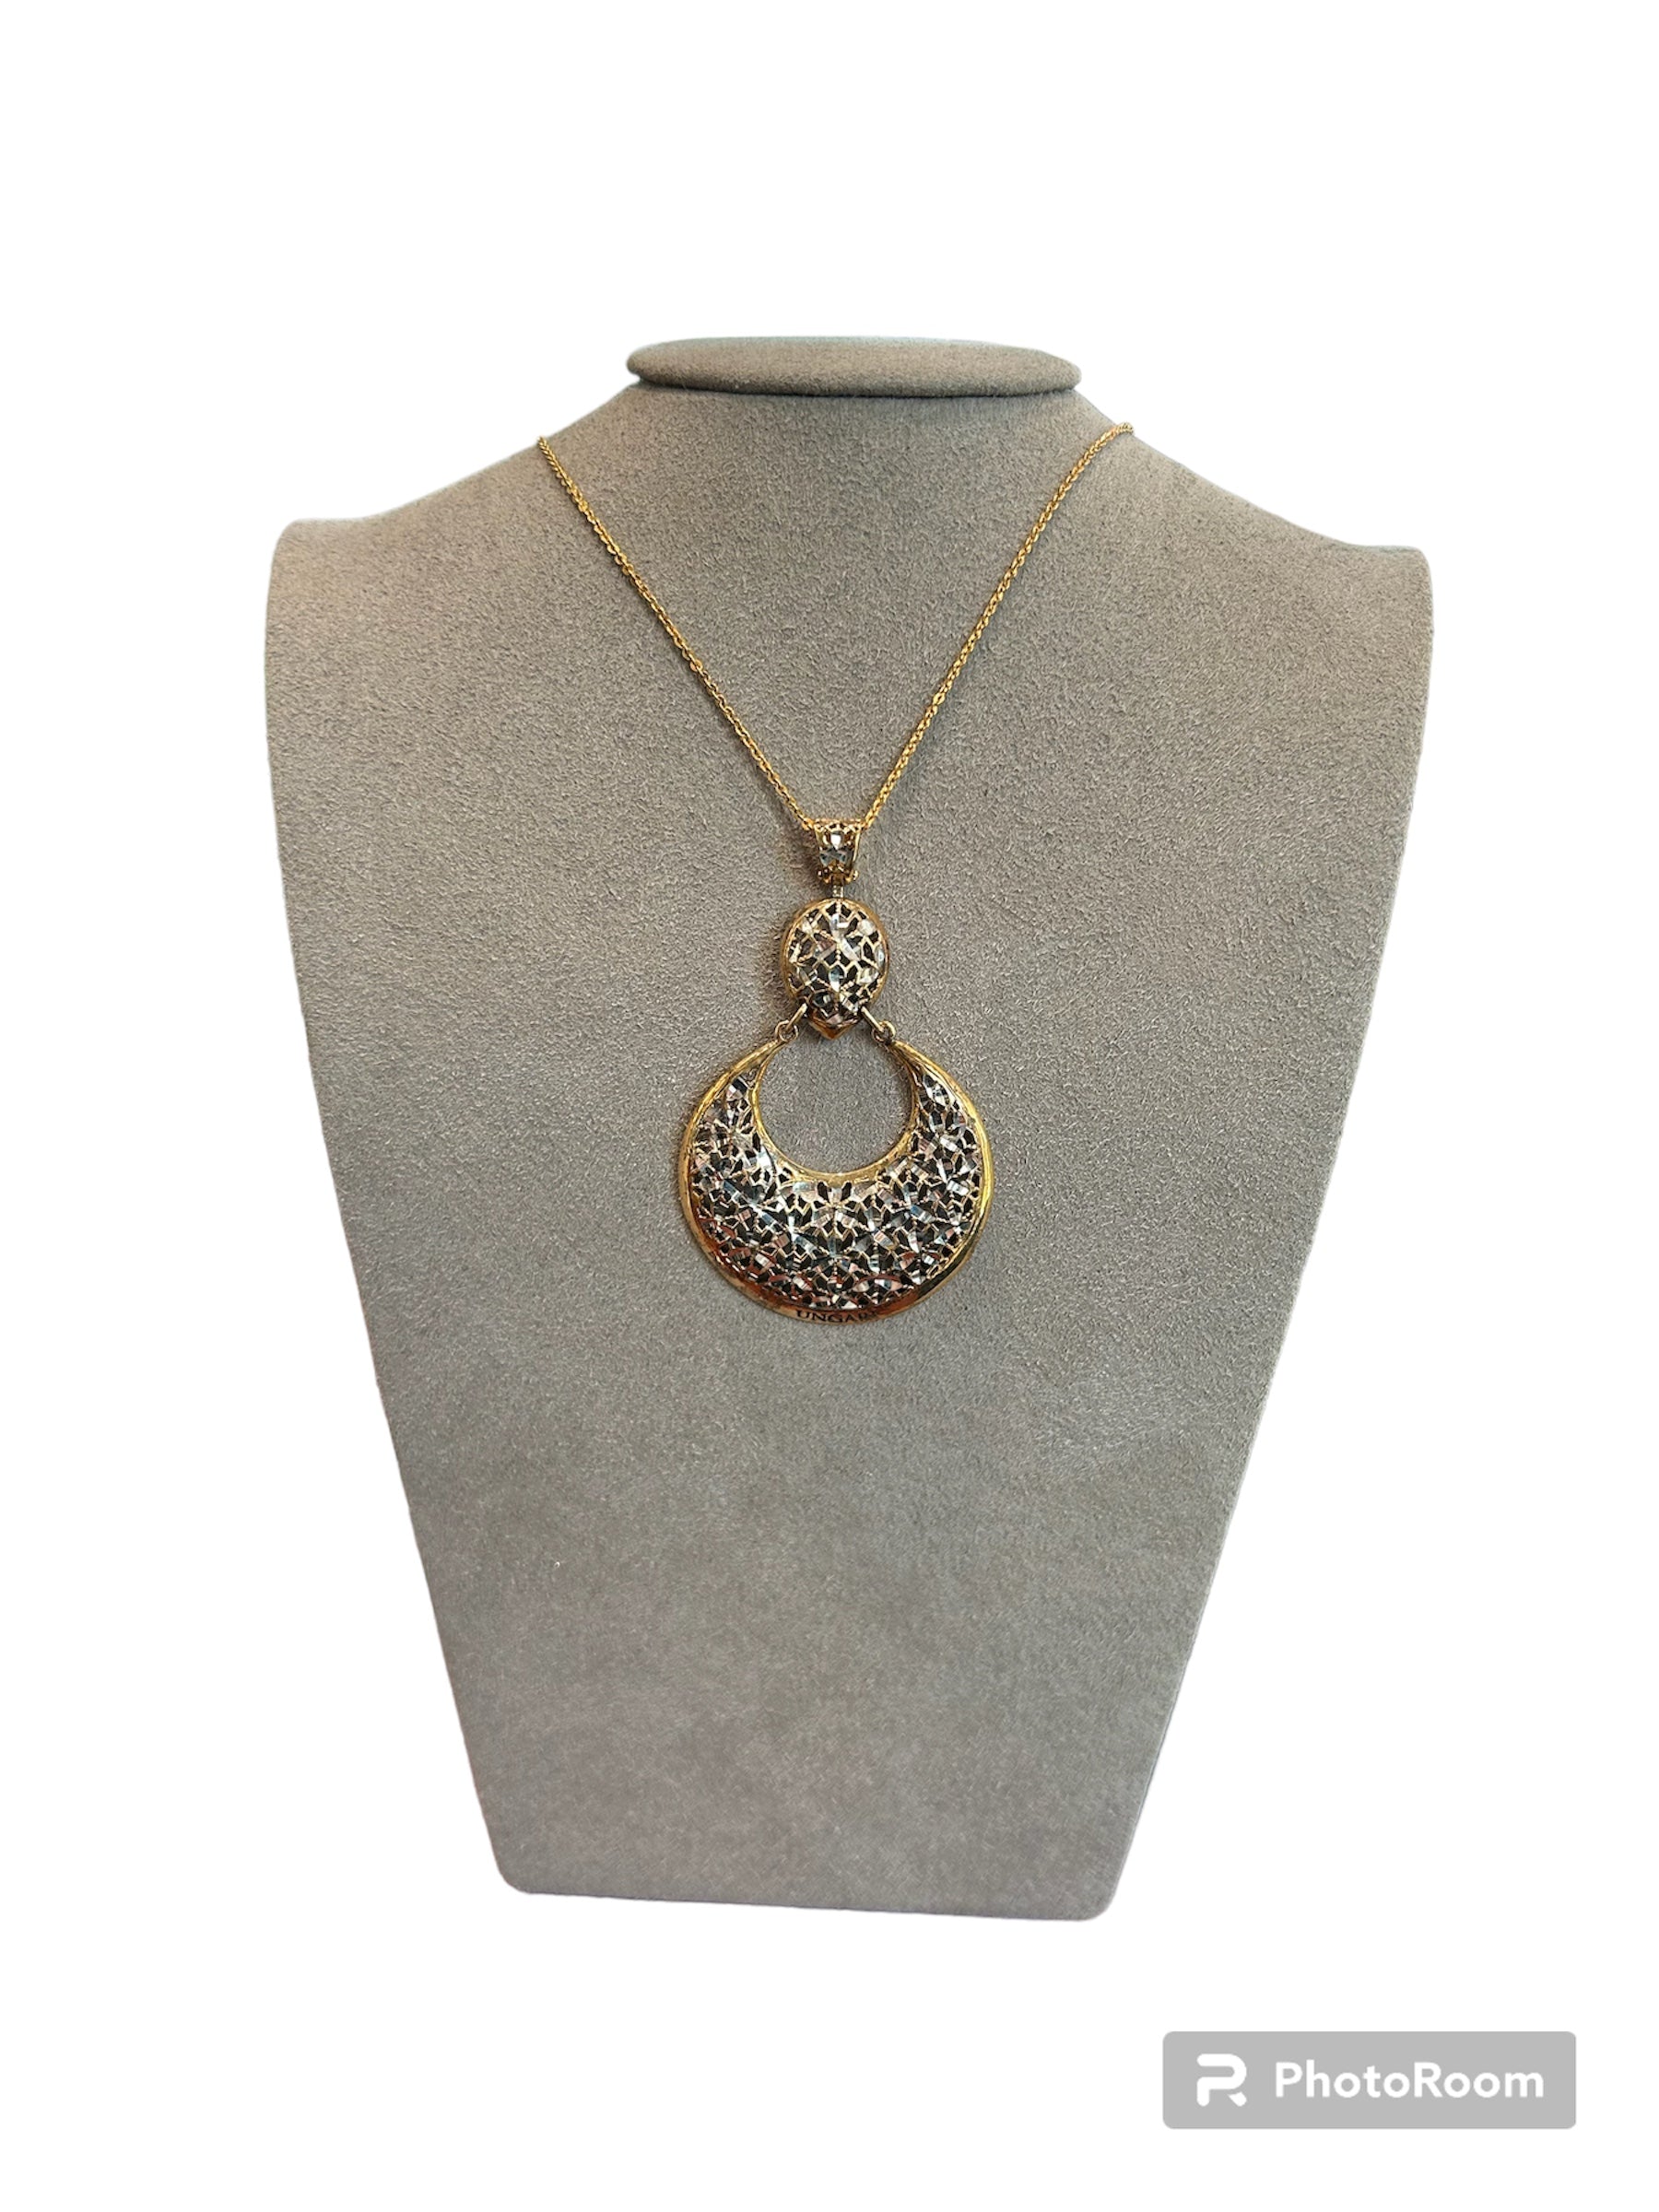 Gold silver necklace - CL 075